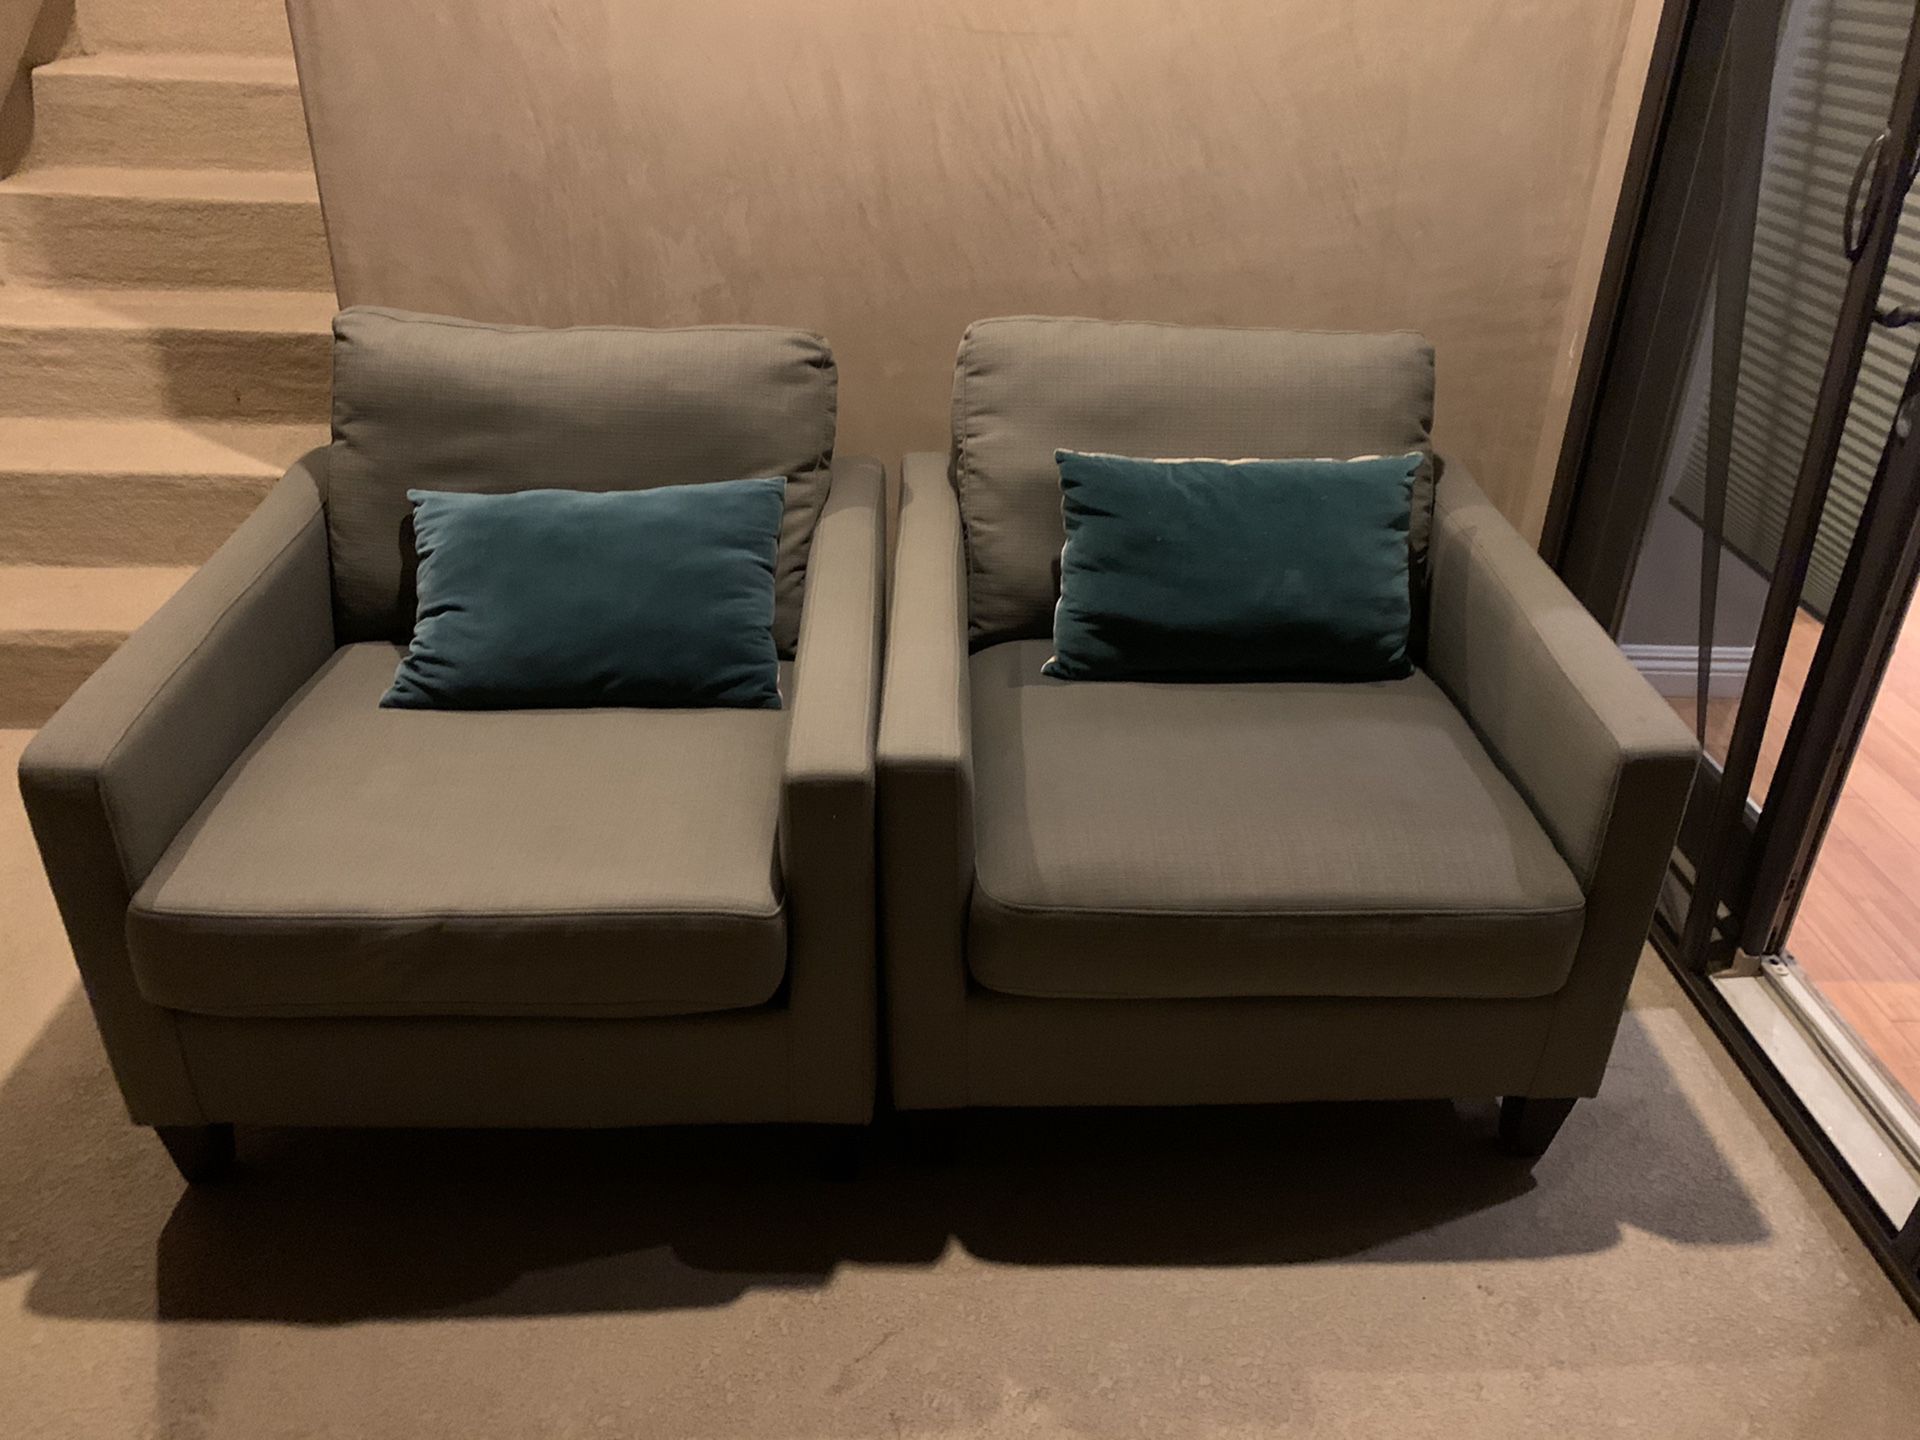 Two cloth chairs